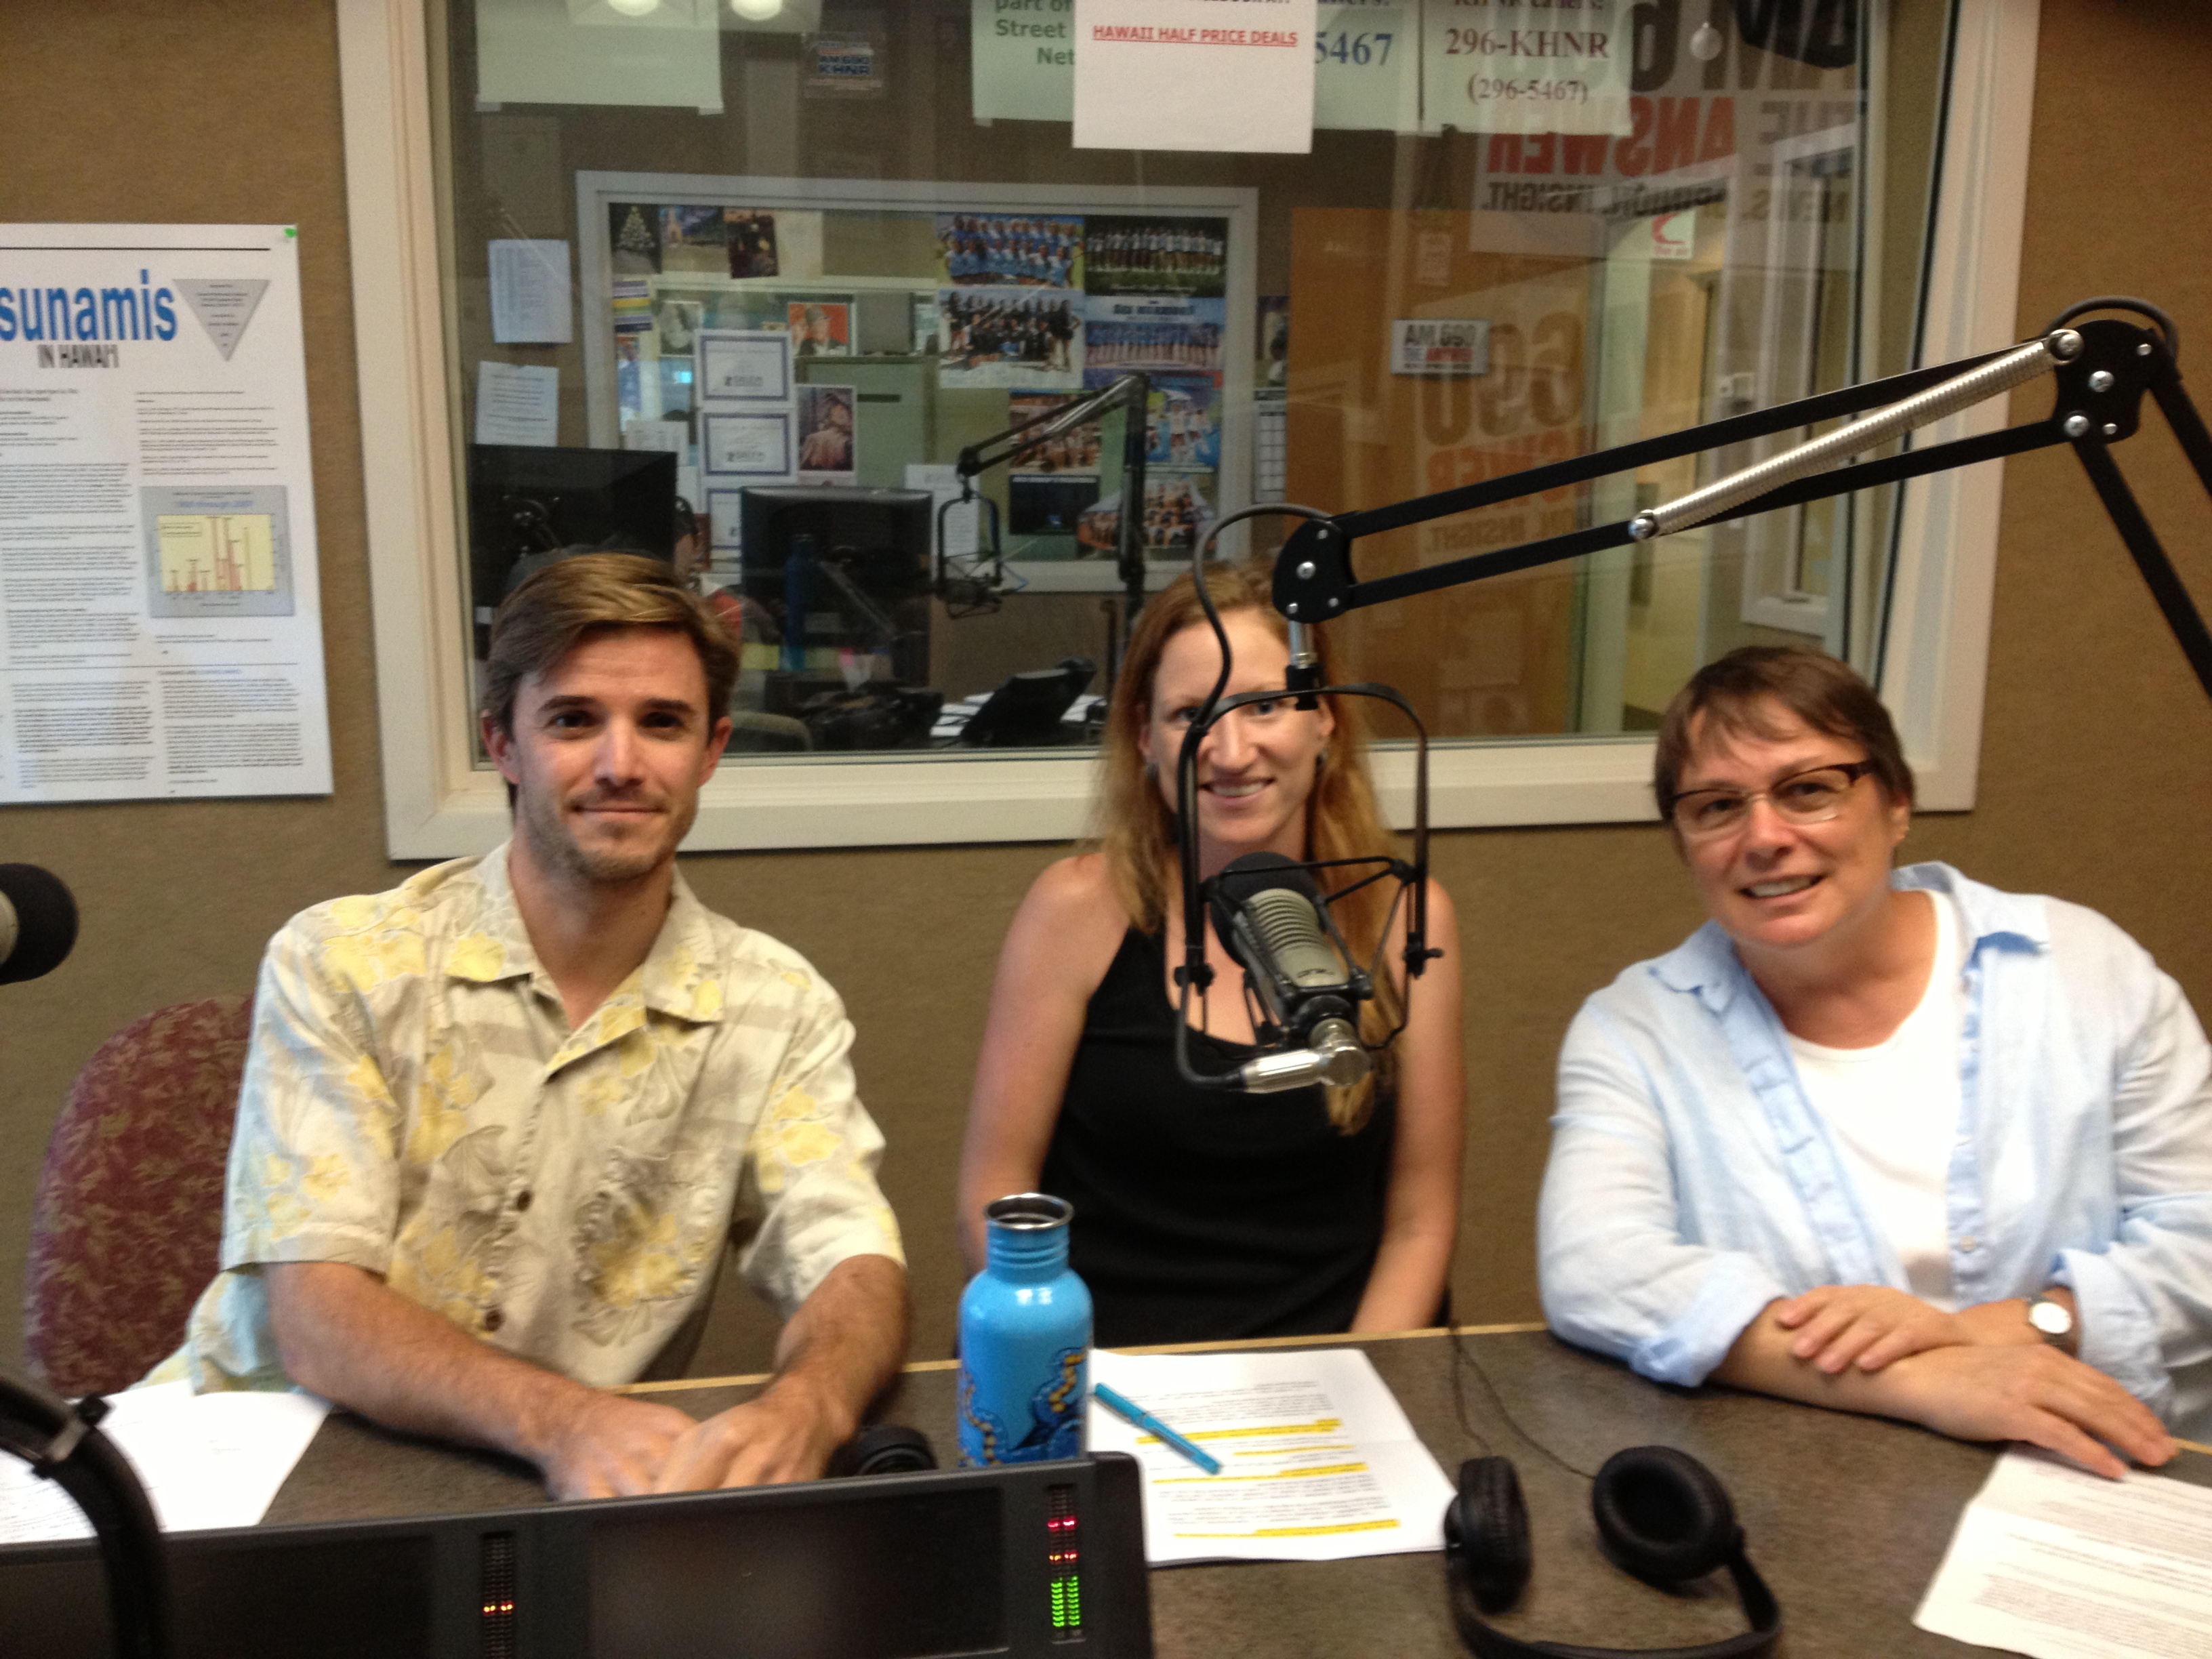 Exploring marine sciences with Dr. Brian Glazer, Heather Ylitalo-Ward, and Dr. Ruth Gates